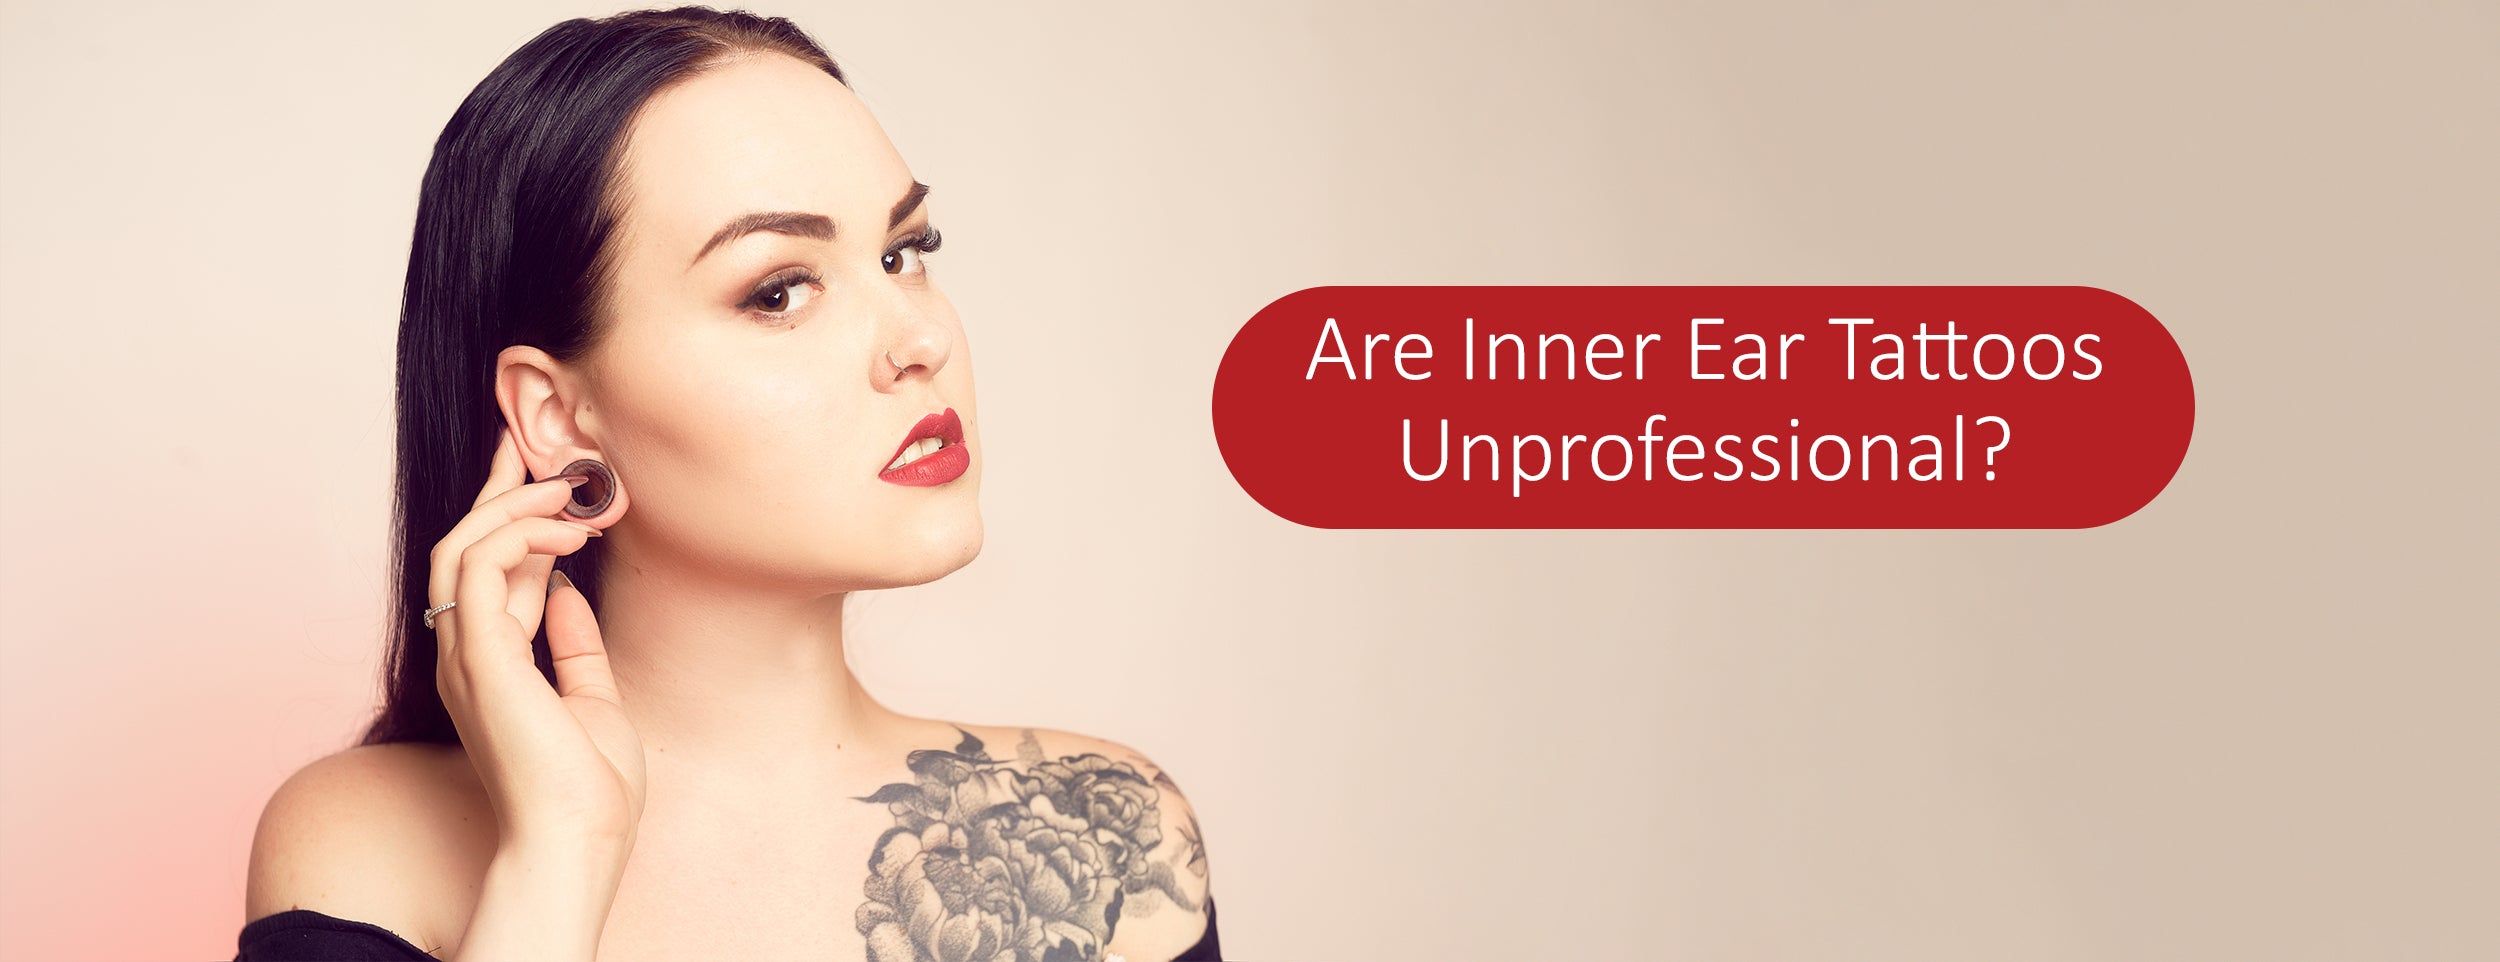 Getting an Inner Ear Tattoo: Pros and Cons - AuthorityTattoo